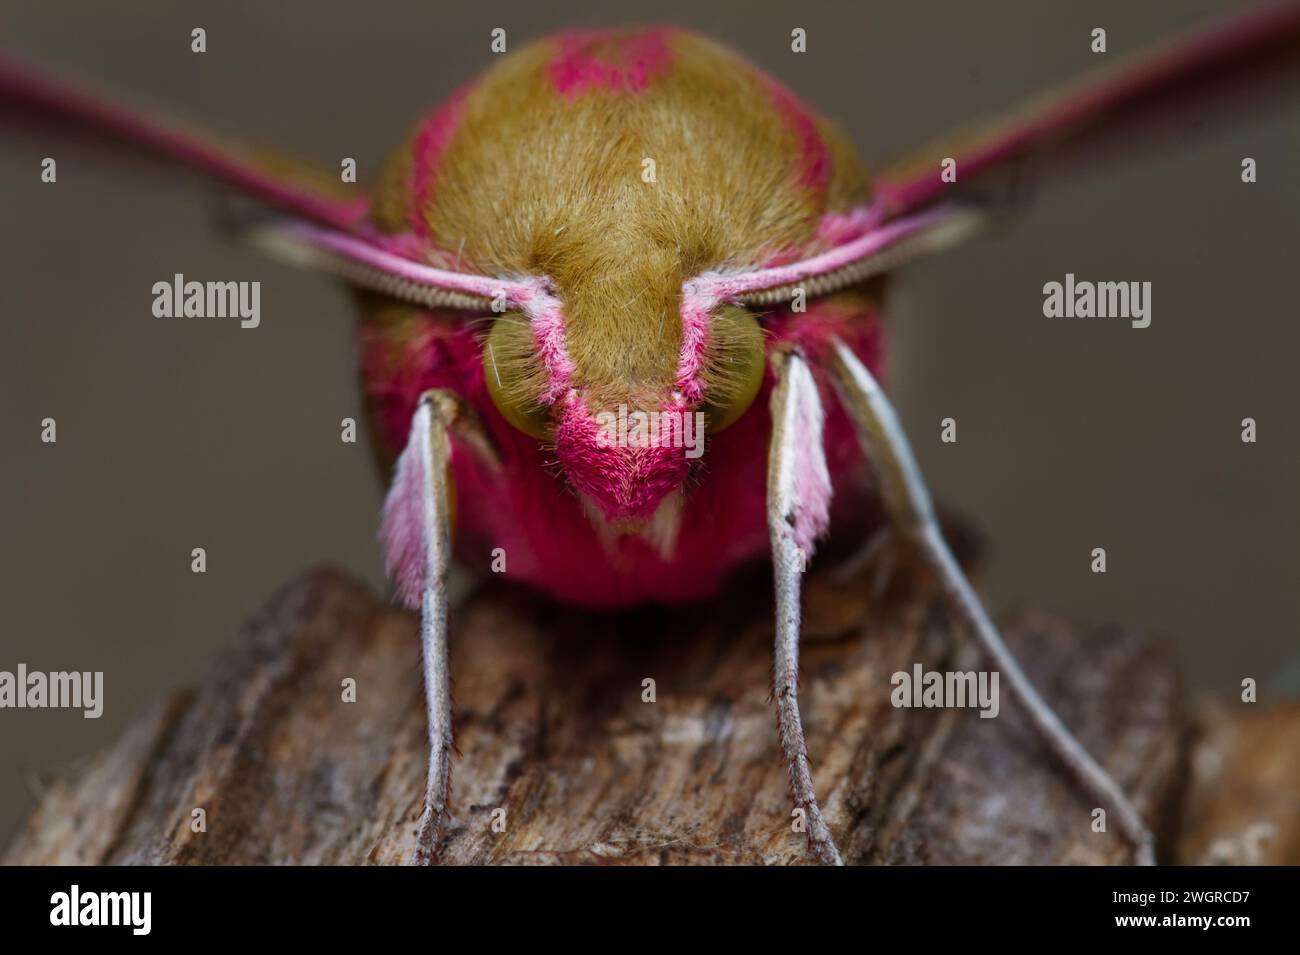 Macro, Close Up Front View Of The Hairy Head Of An Elephant Hawk Moth, Deilephila elpenor, Resting, Sitting On A Piece Of Wood, New Forest, England,UK Stock Photo